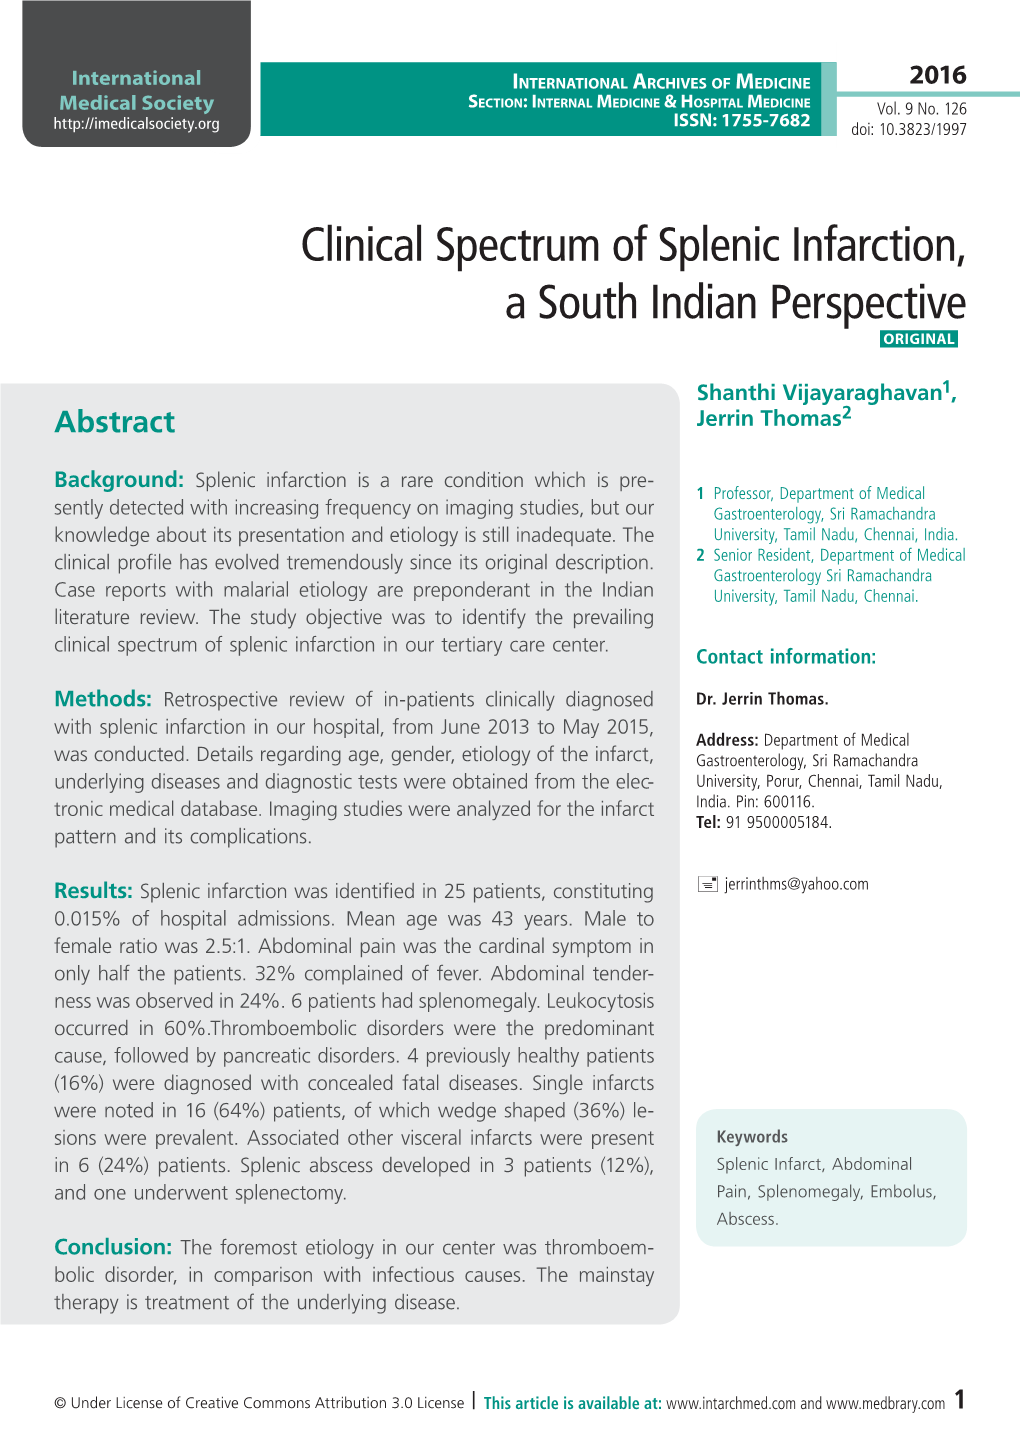 Clinical Spectrum of Splenic Infarction, a South Indian Perspective ORIGINAL